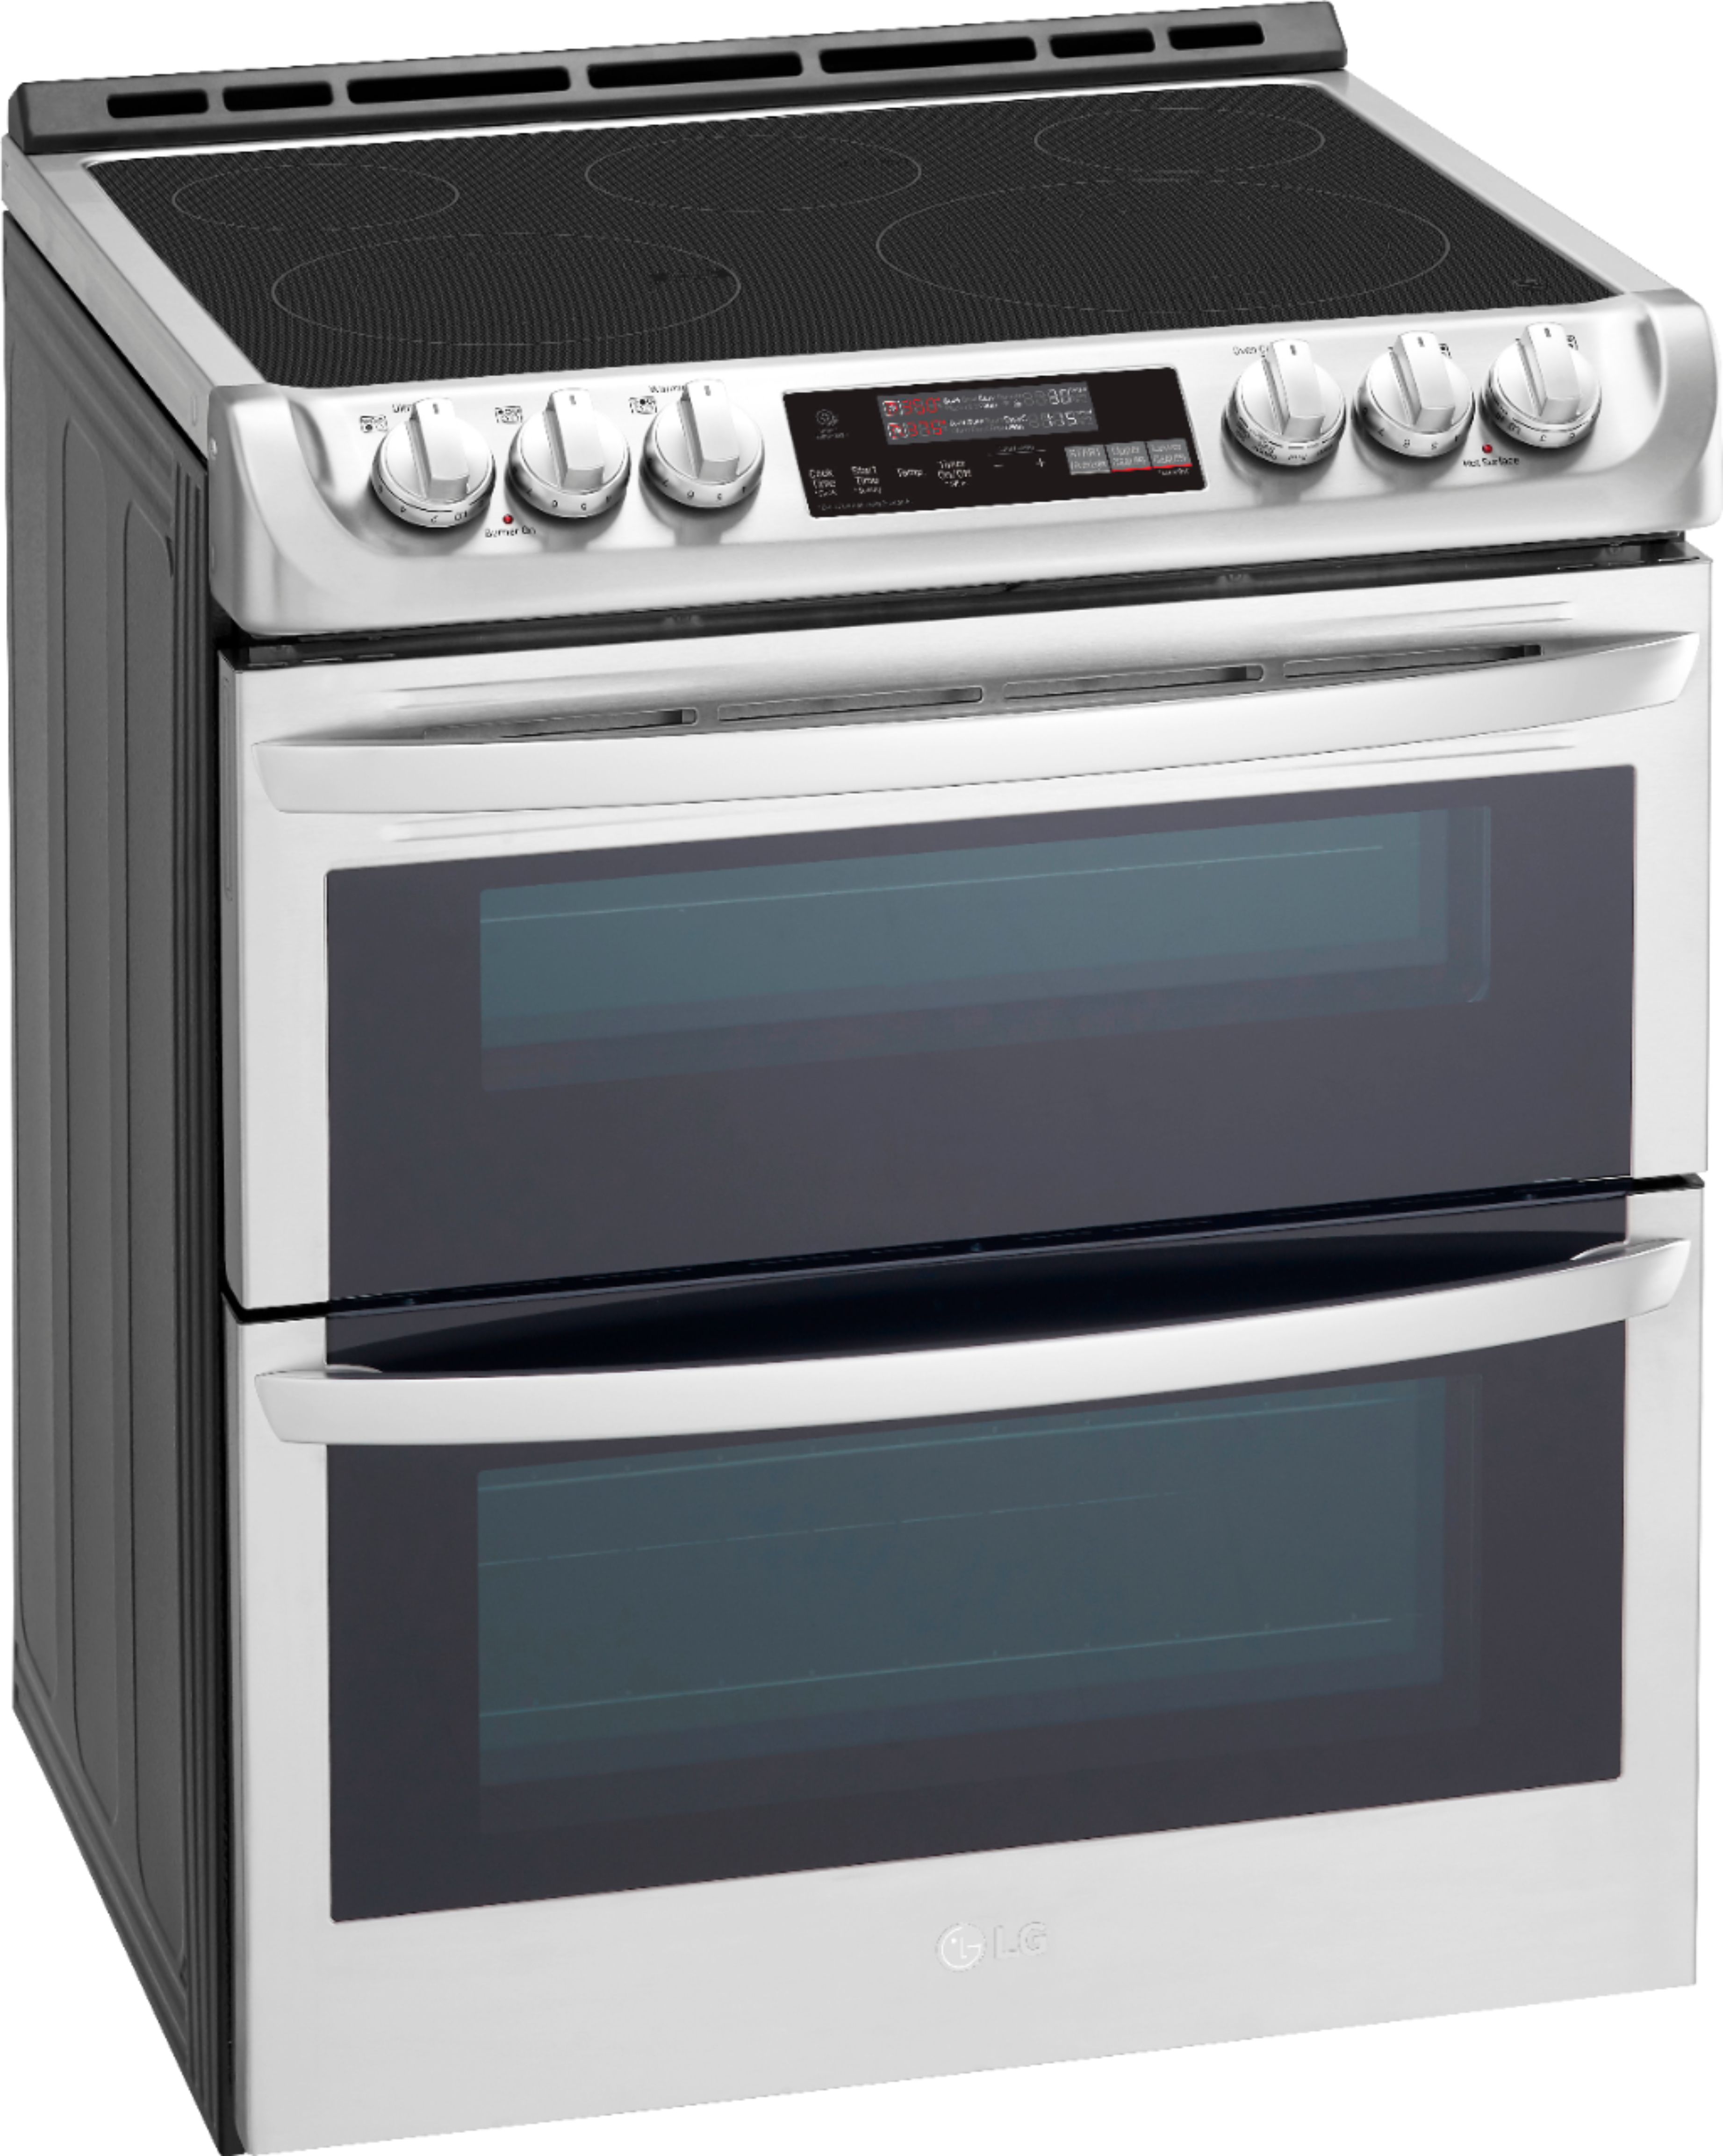 Best Double Oven Ranges Of 2023 Reviewed | lupon.gov.ph